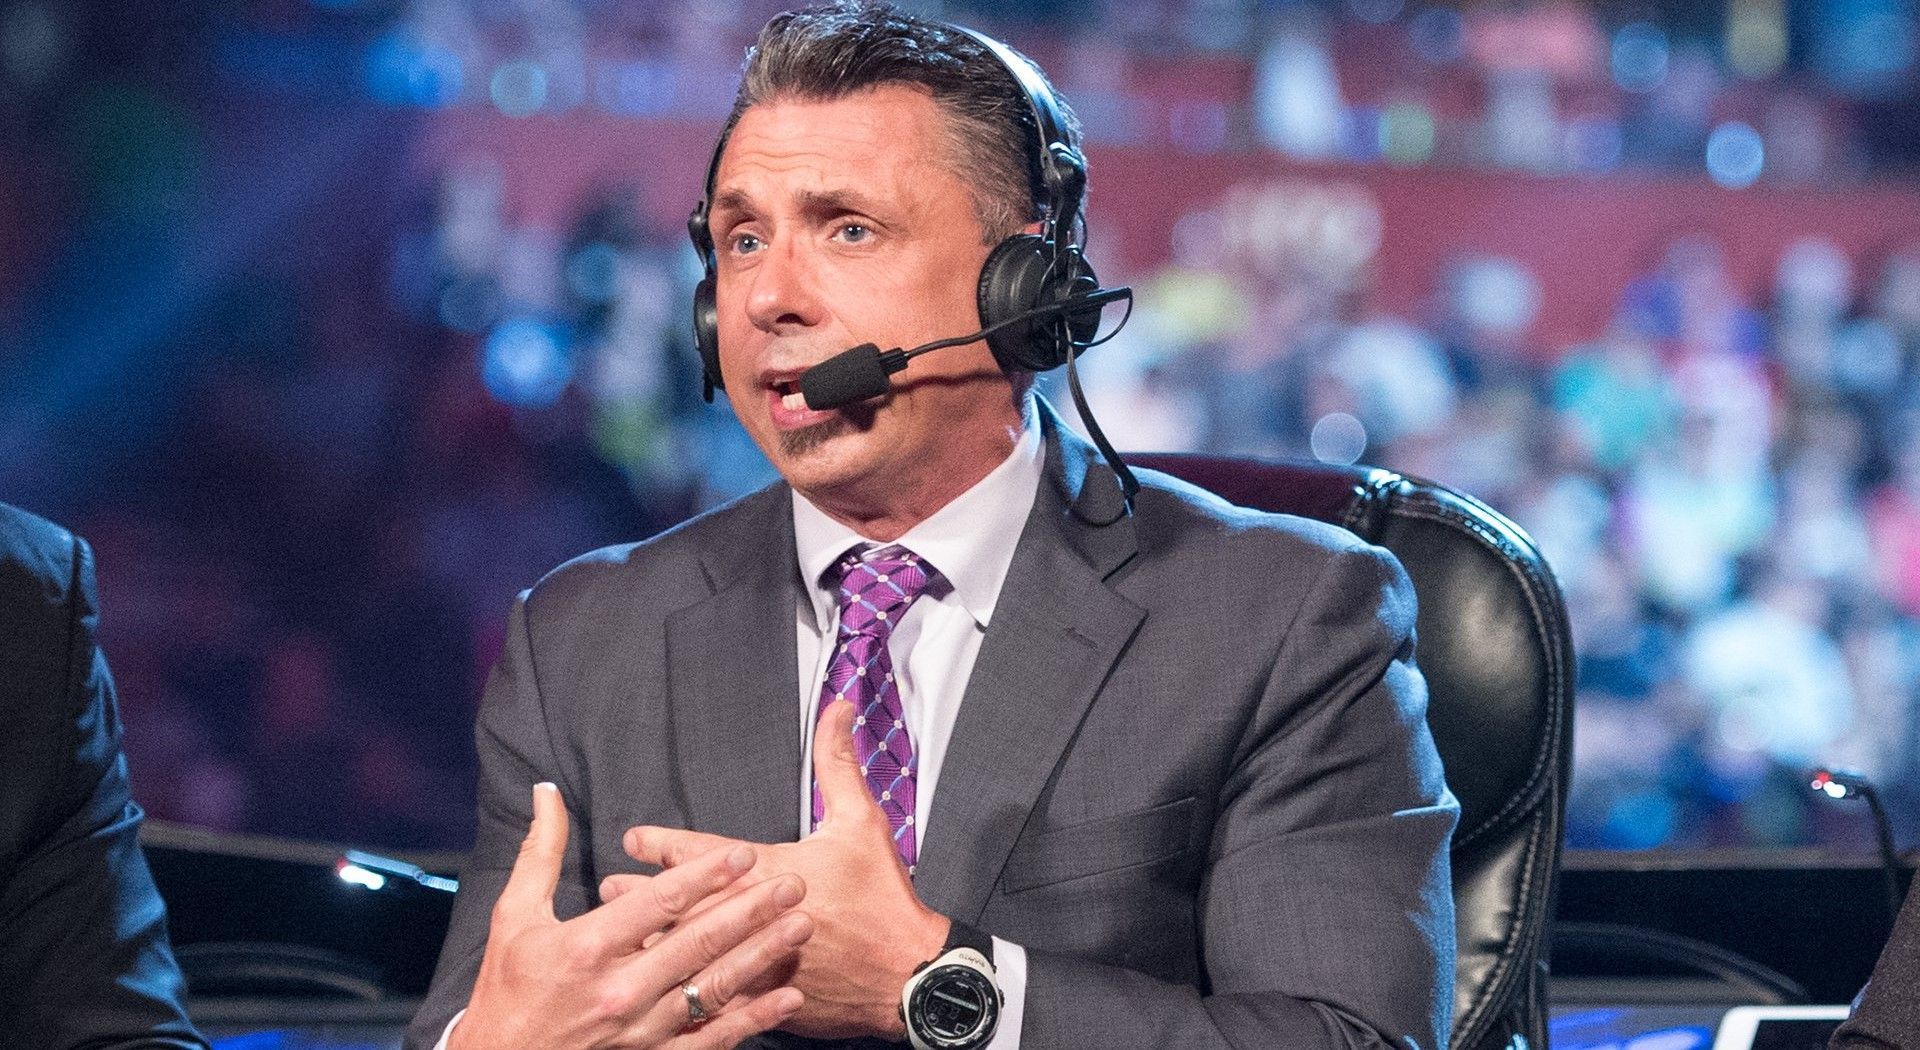 A current WWE RAW star poked fun at Michael Cole